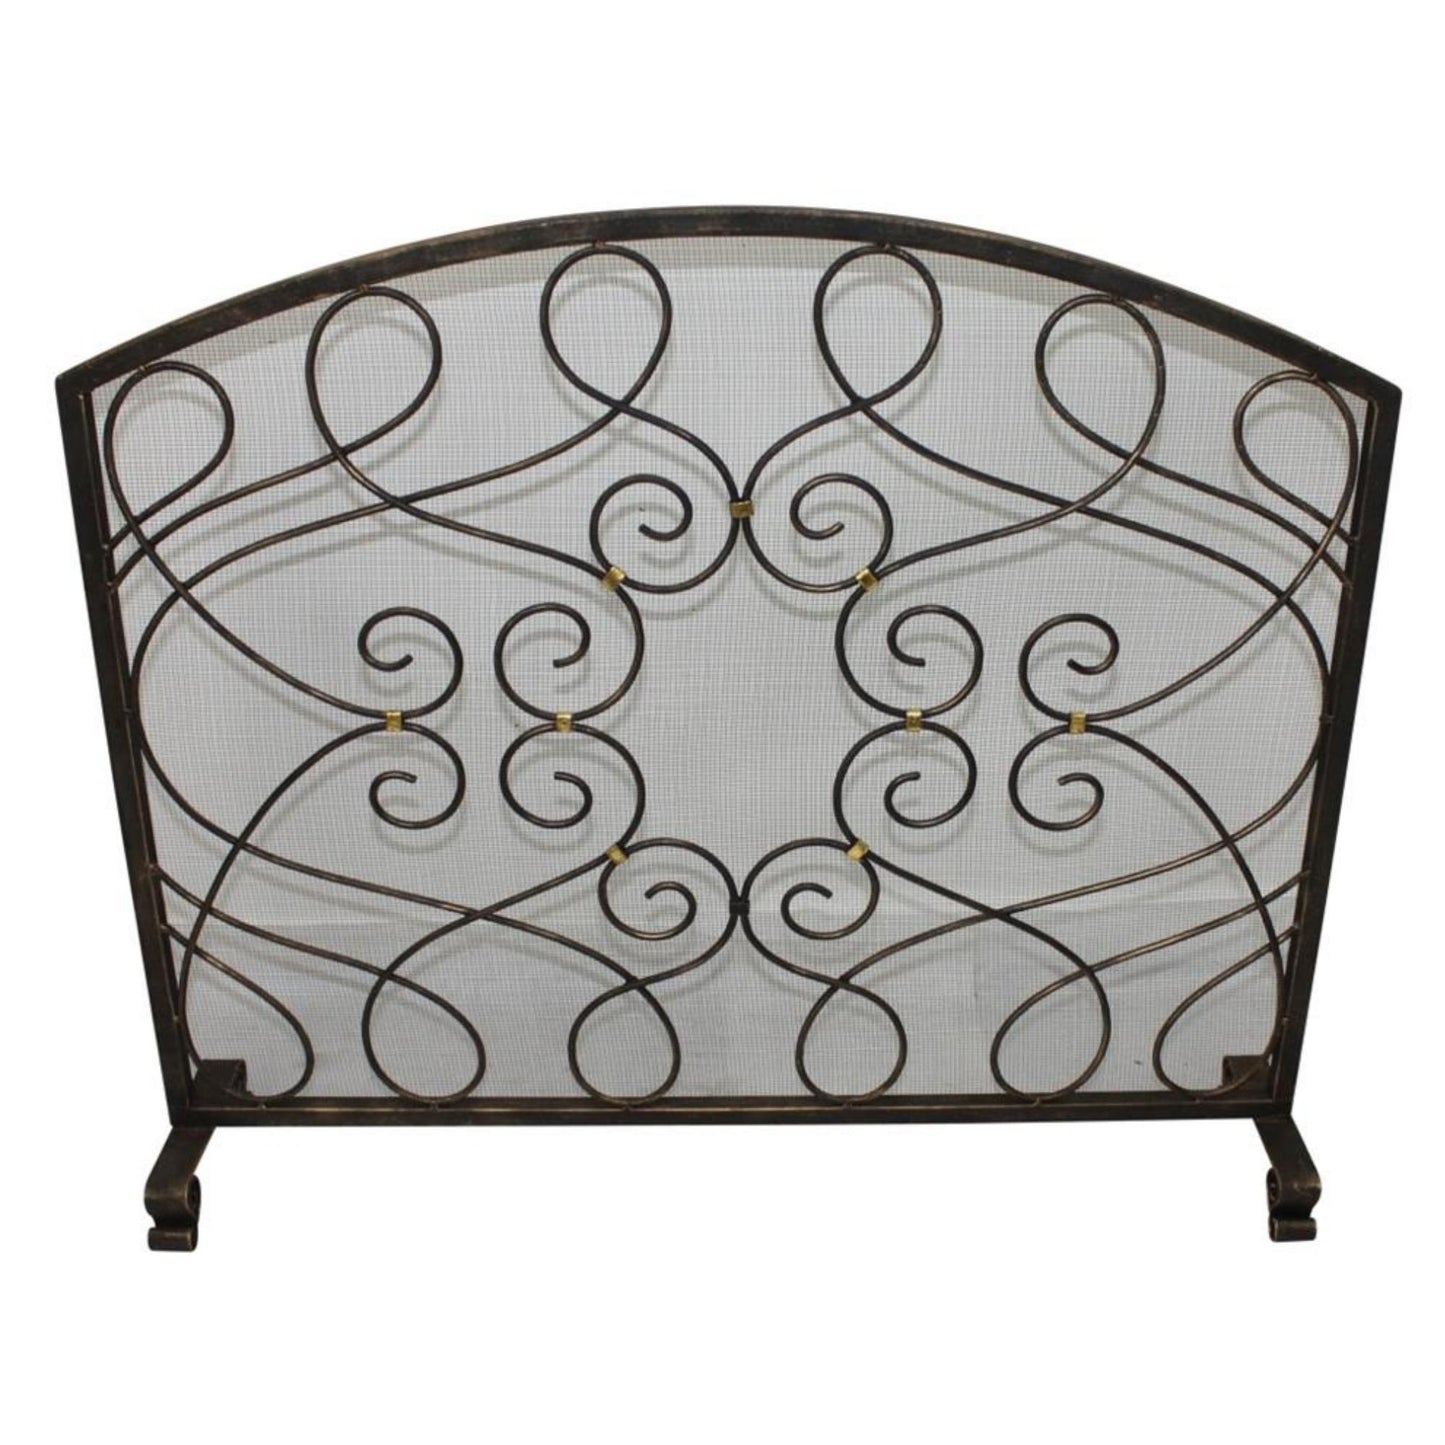 Iron Loop Design Fireplace Screen with Arched Top - Single Panel Fire Screen | InsideOutCatalog.com